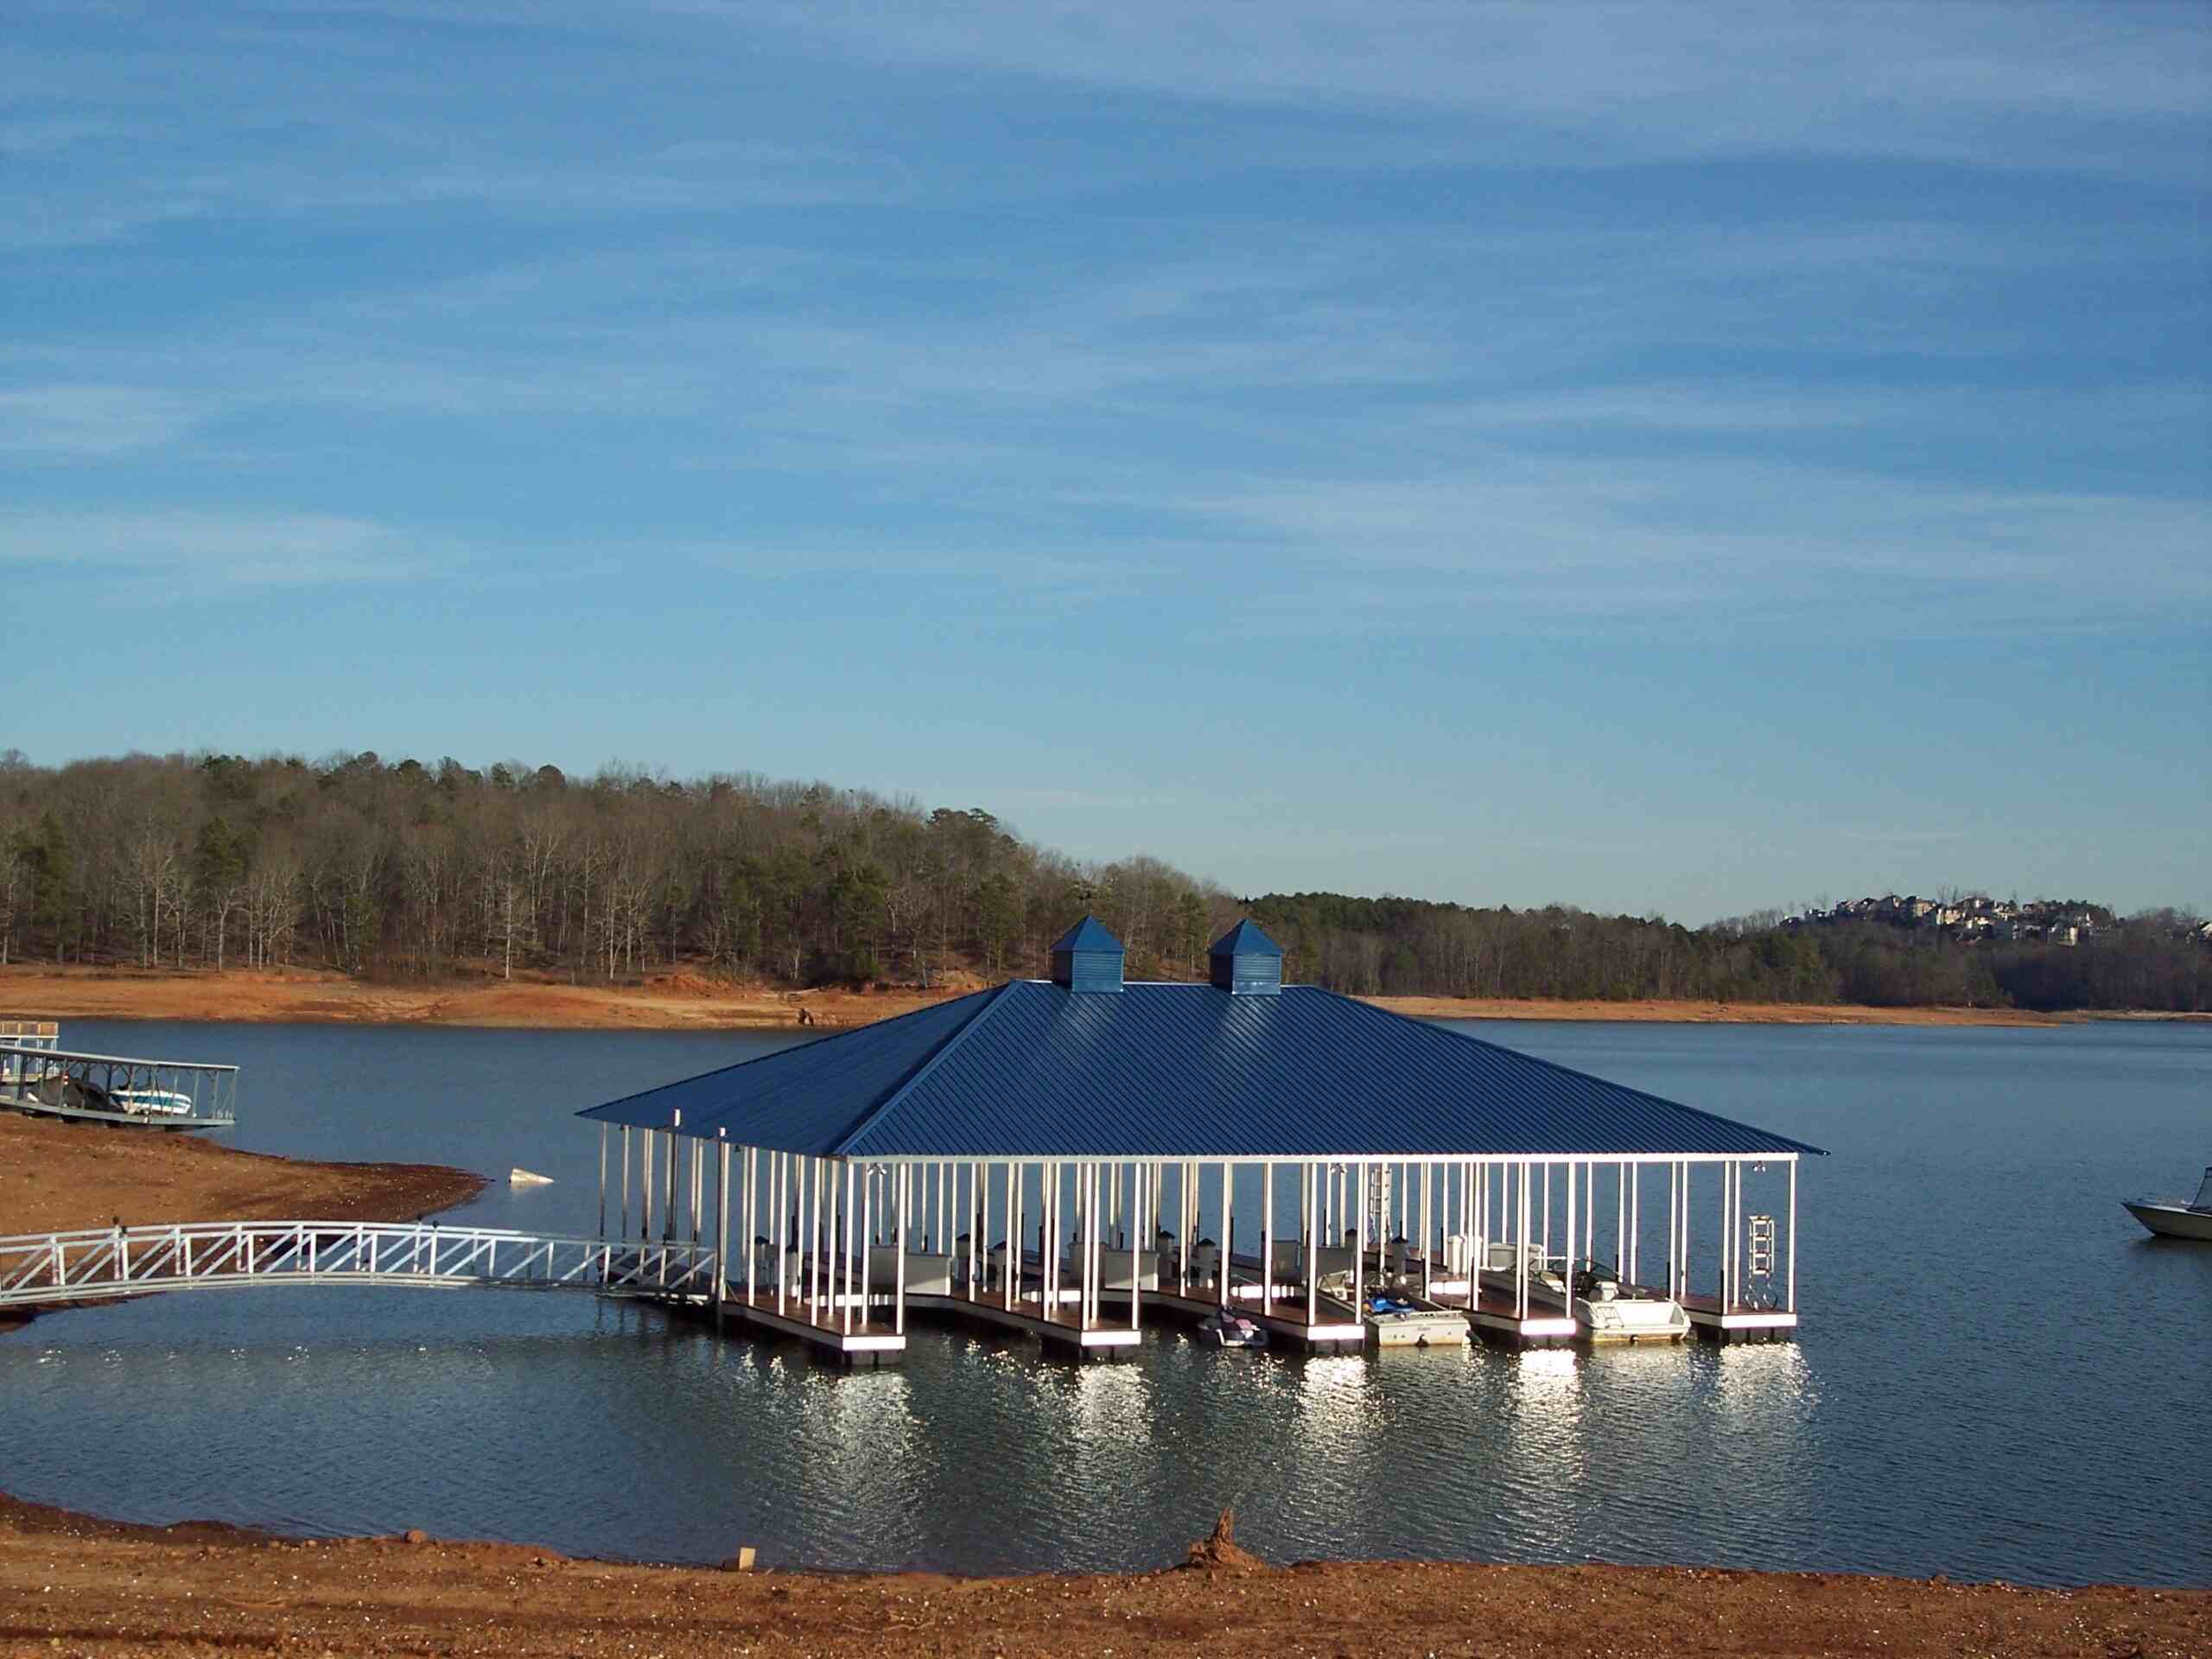 A dock with capacity for five boats, featuring a stylish blue hip roof and a pathway elevated above the water